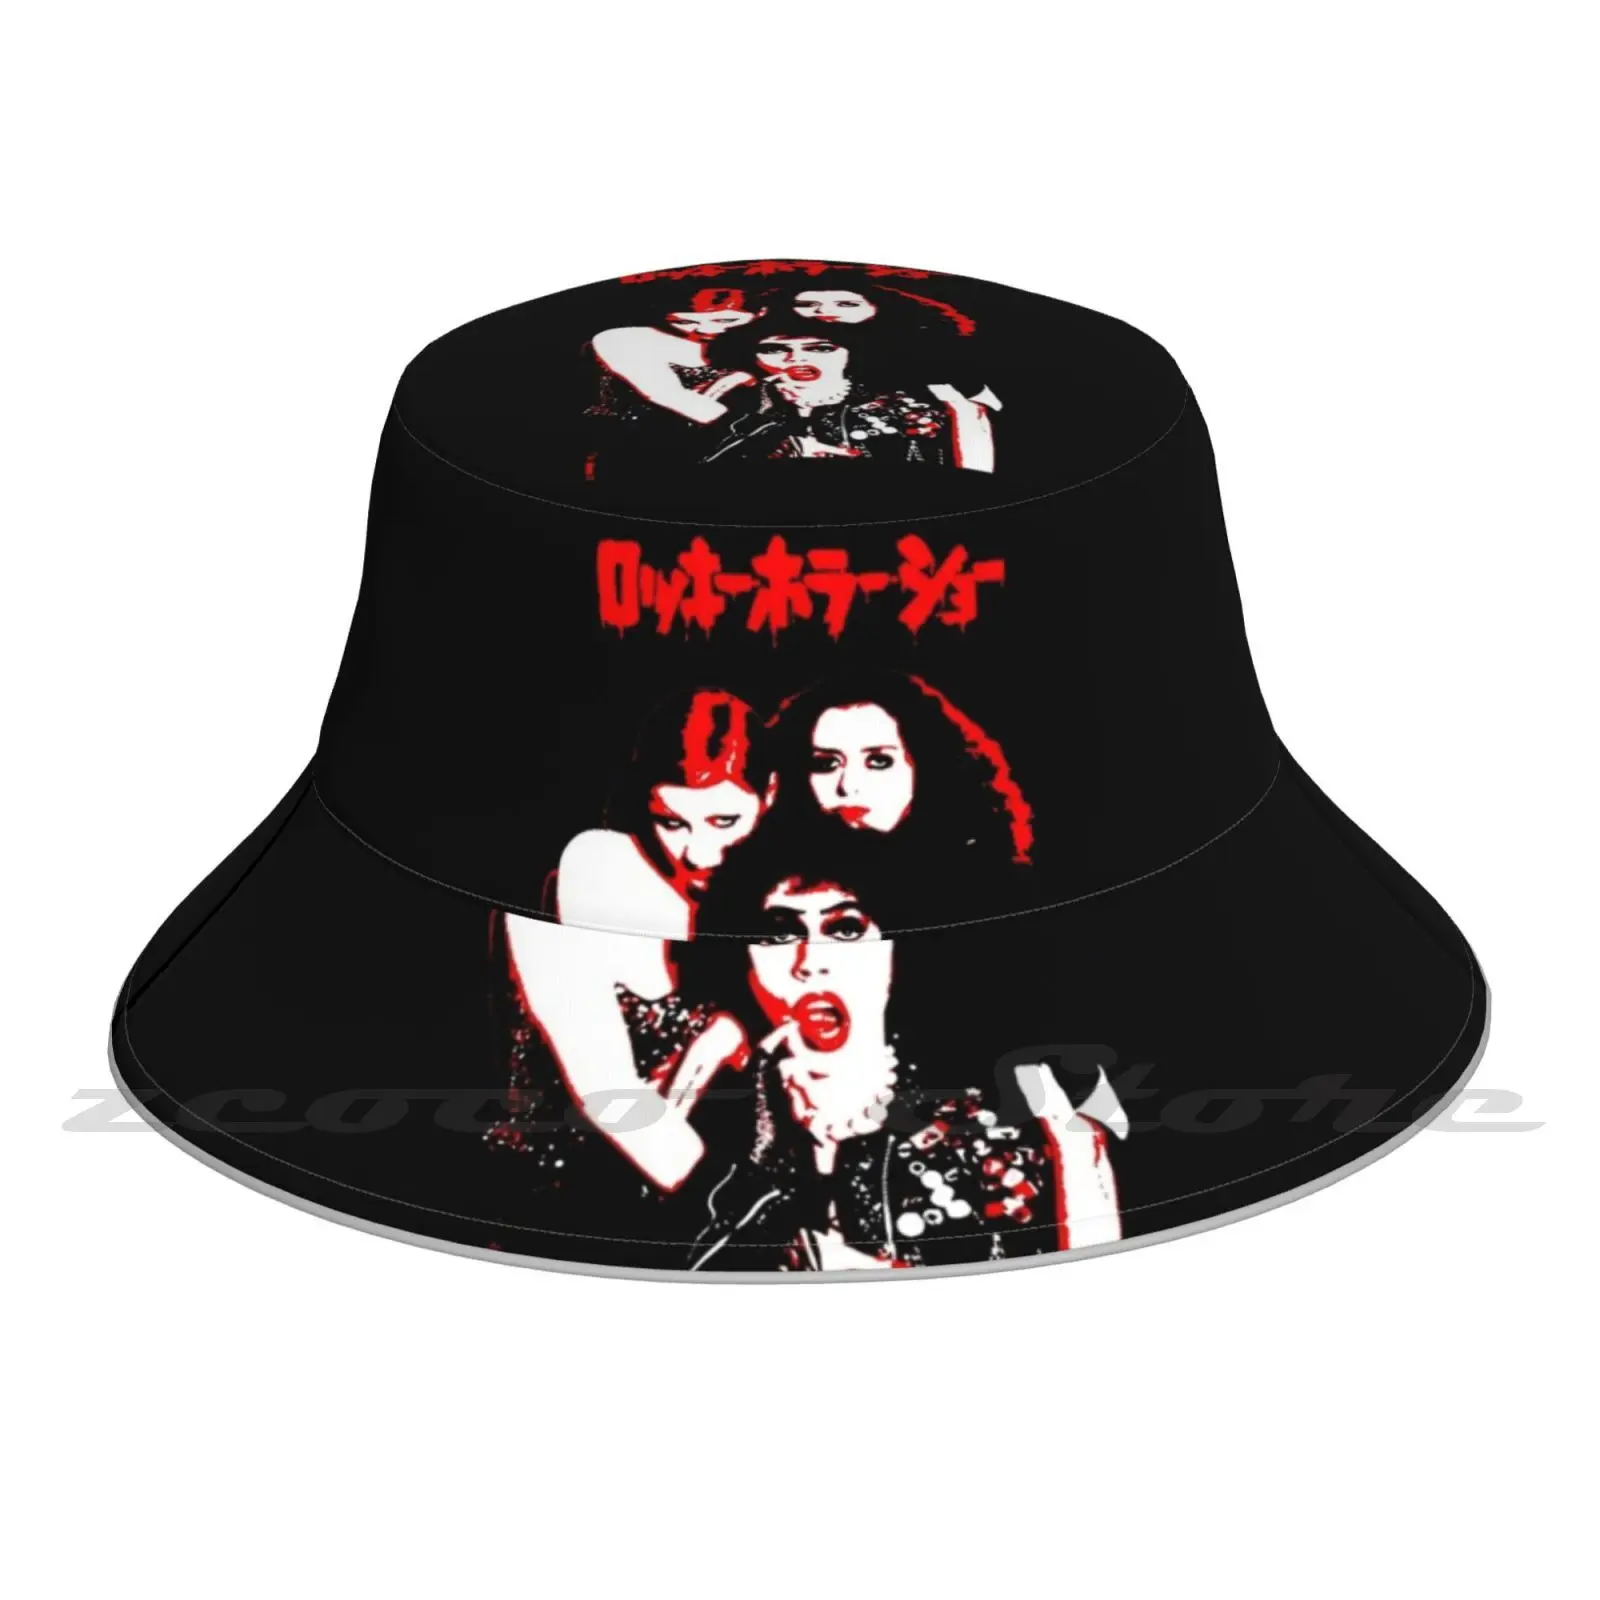 

Tim Curry Quinn & Nell Campbell ( Horror Picture Show 1975 ) Cap Diy Foldable Sunshade Fashion Leisure Bucket Hat The Horror